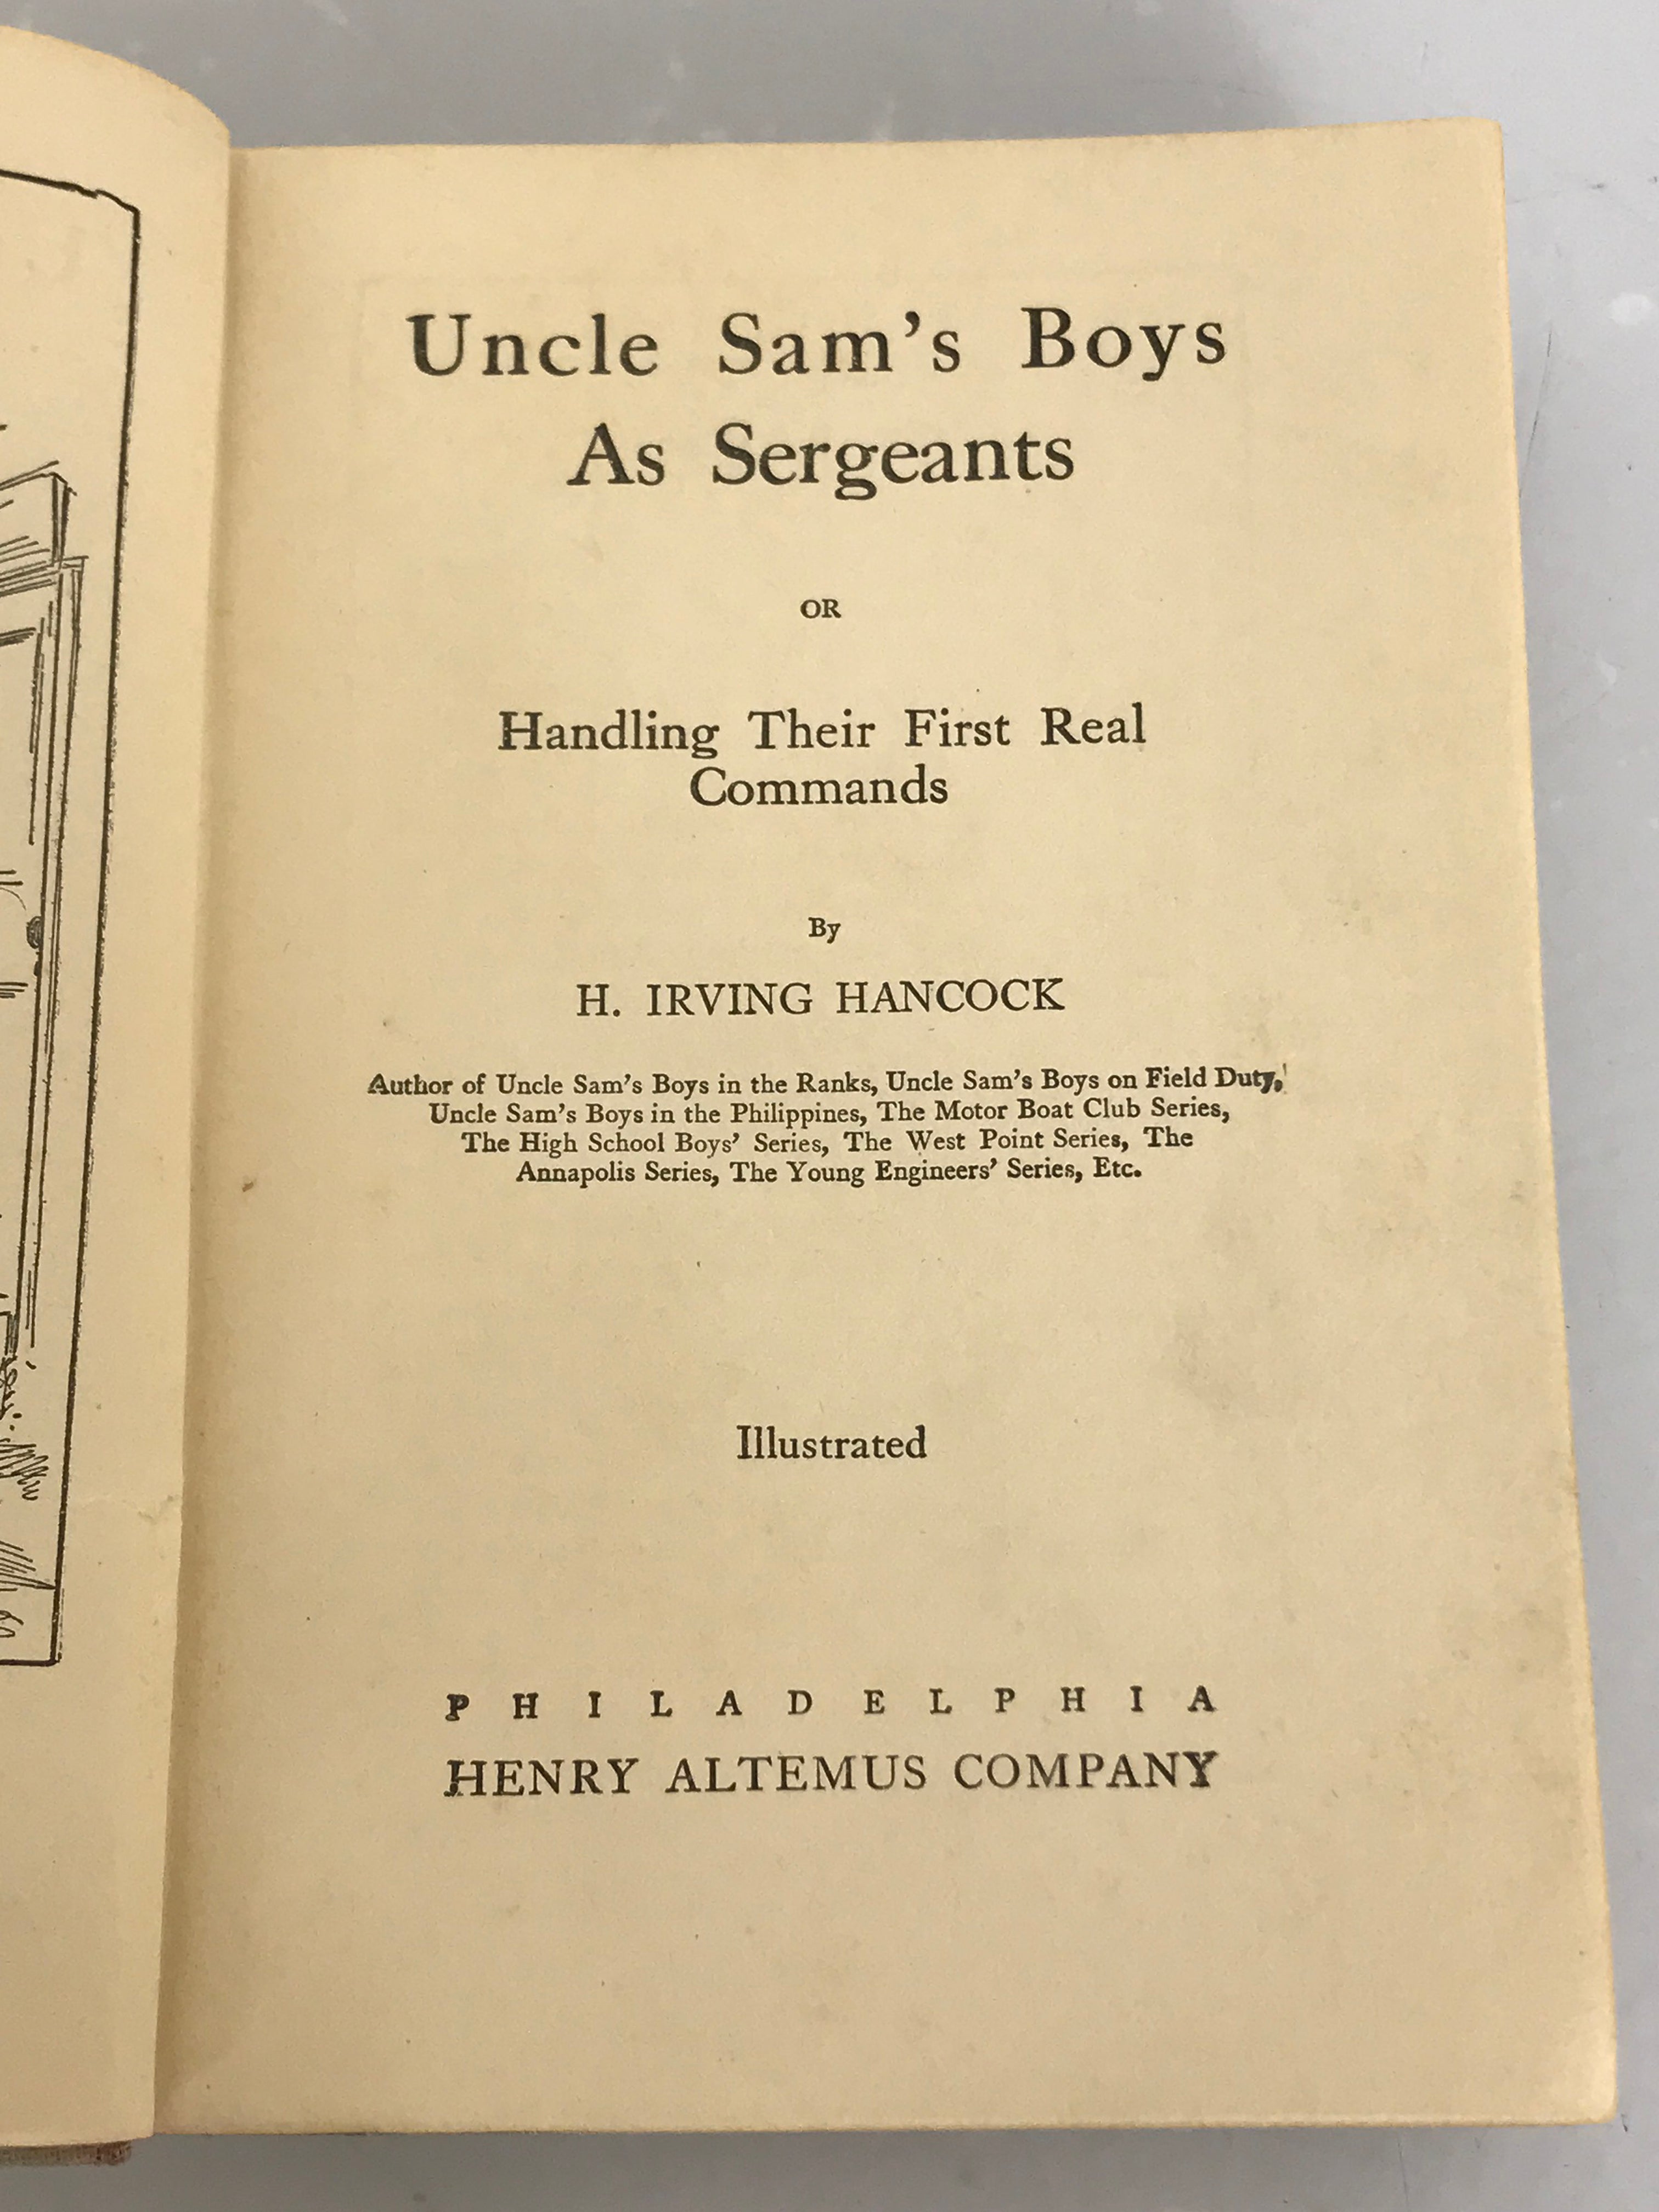 Lot of 3 Antique Adventure Books: Uncle Sam's Boys as Sergeants, The Submarine Boys and the Smugglers, Adventures in the Tropics HC